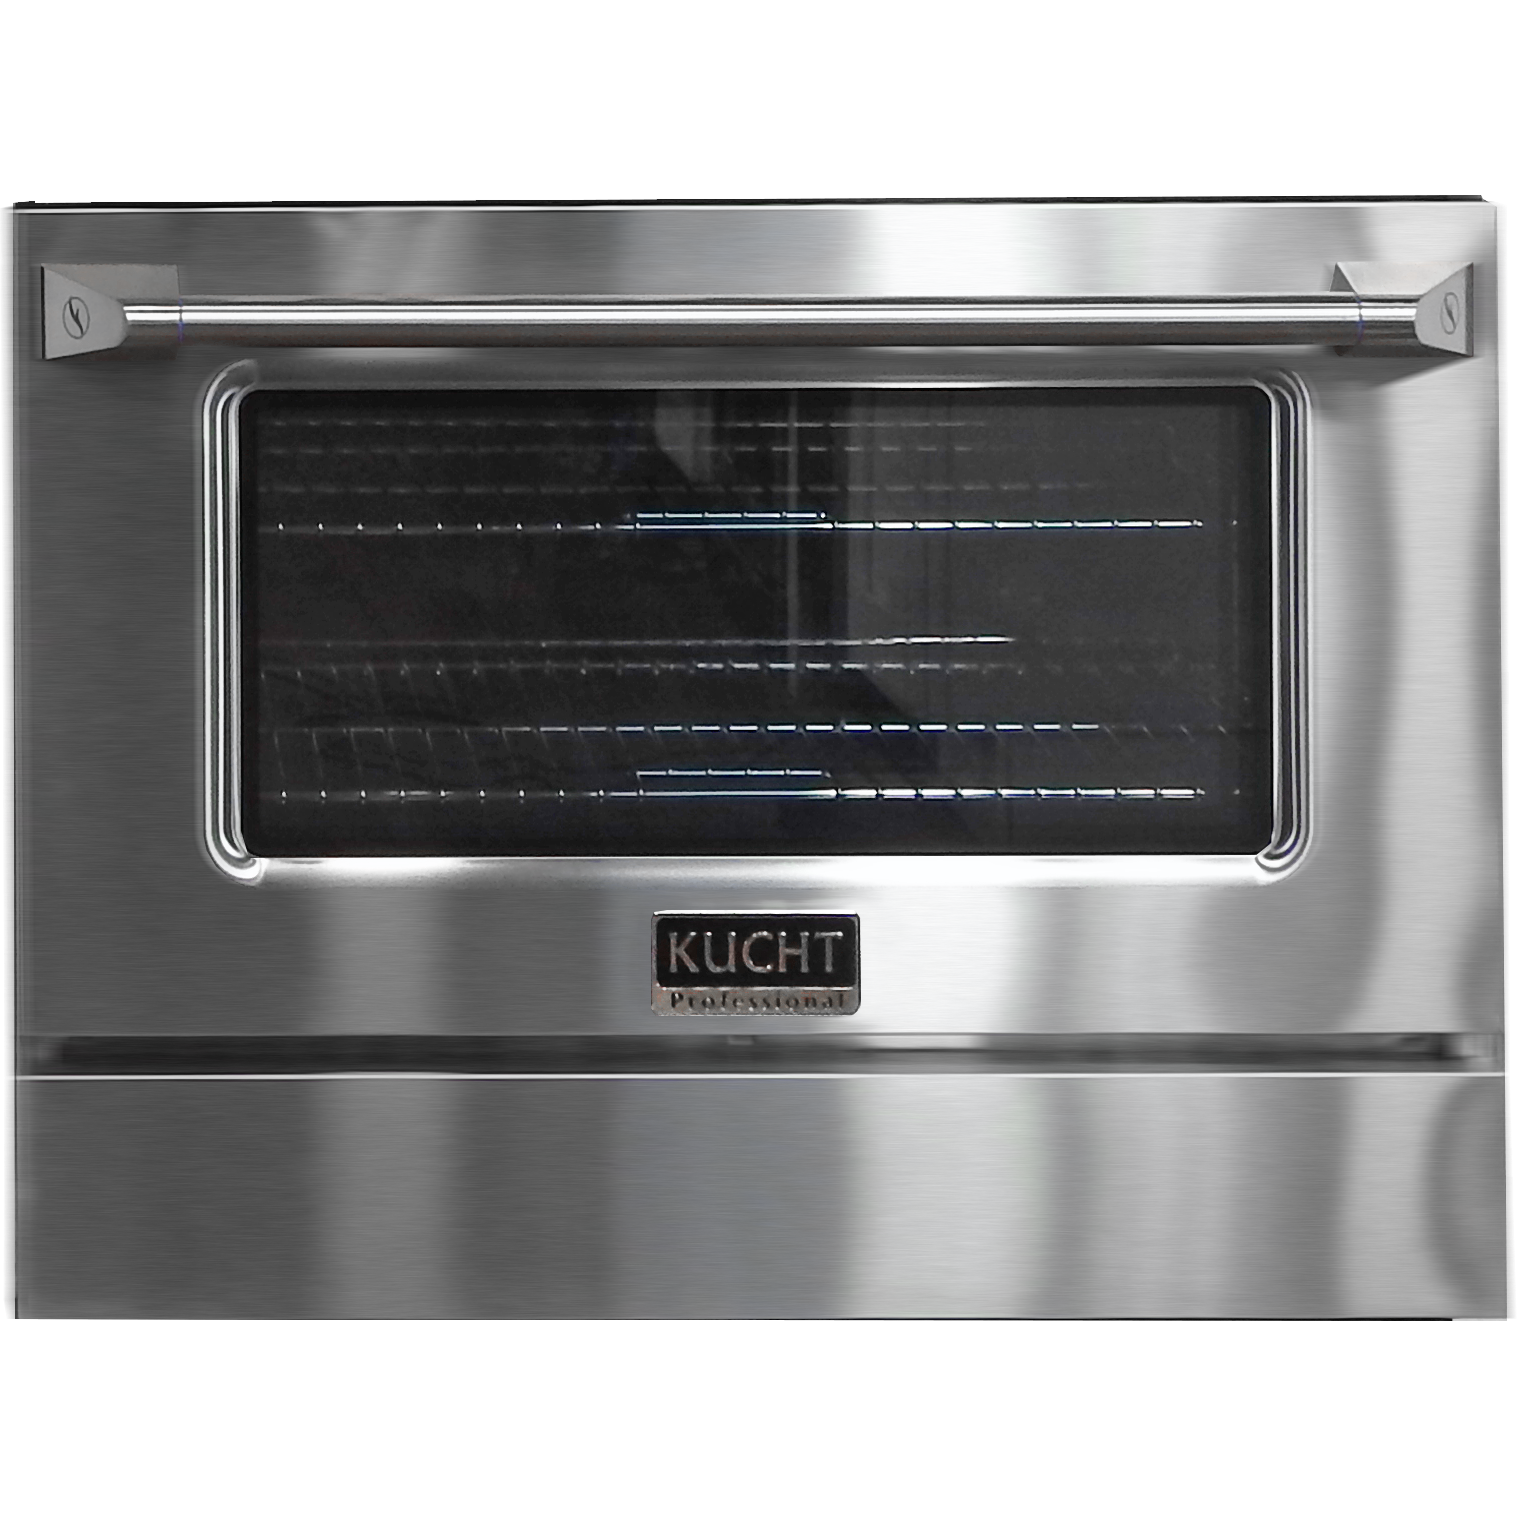 Kucht Oven Door and Kick-Plate Kit for KNG Series 30"